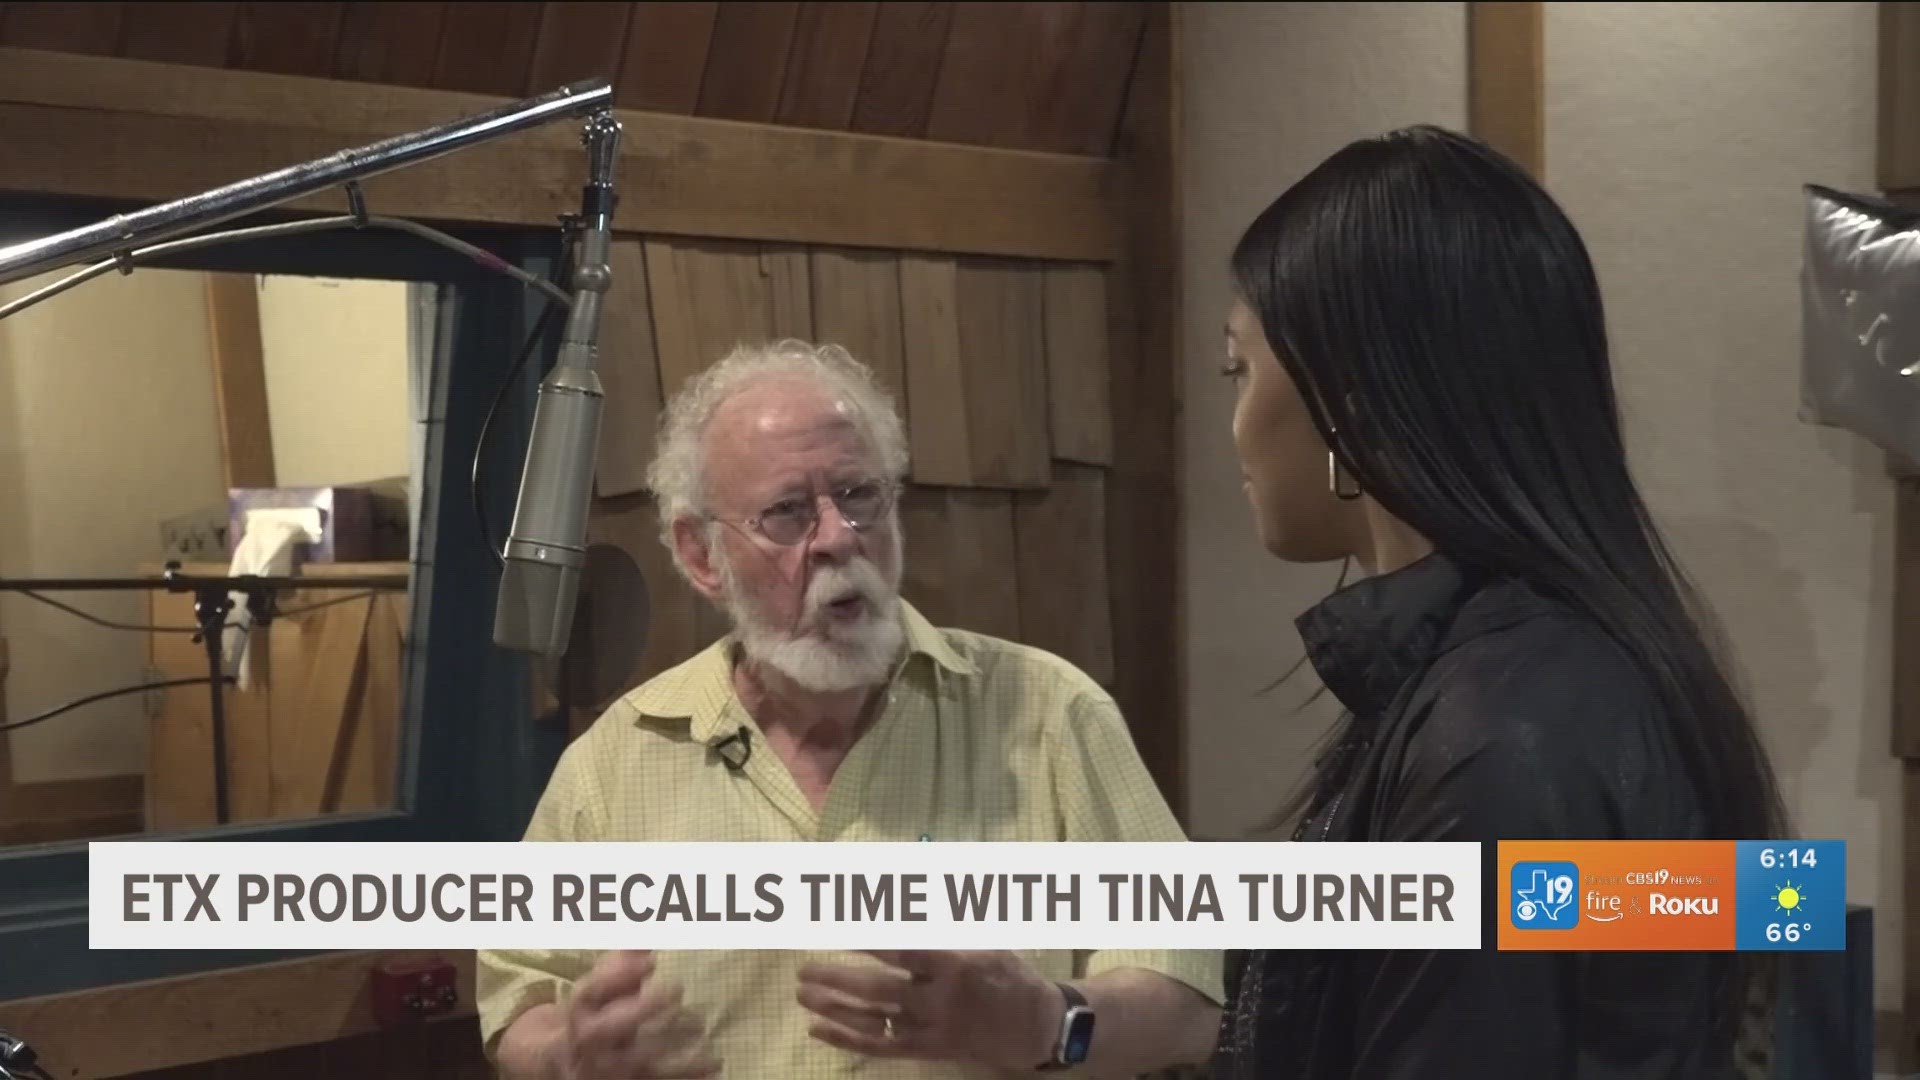 "Recording Tina was just fantastic, talent just lit up the room when she was here."